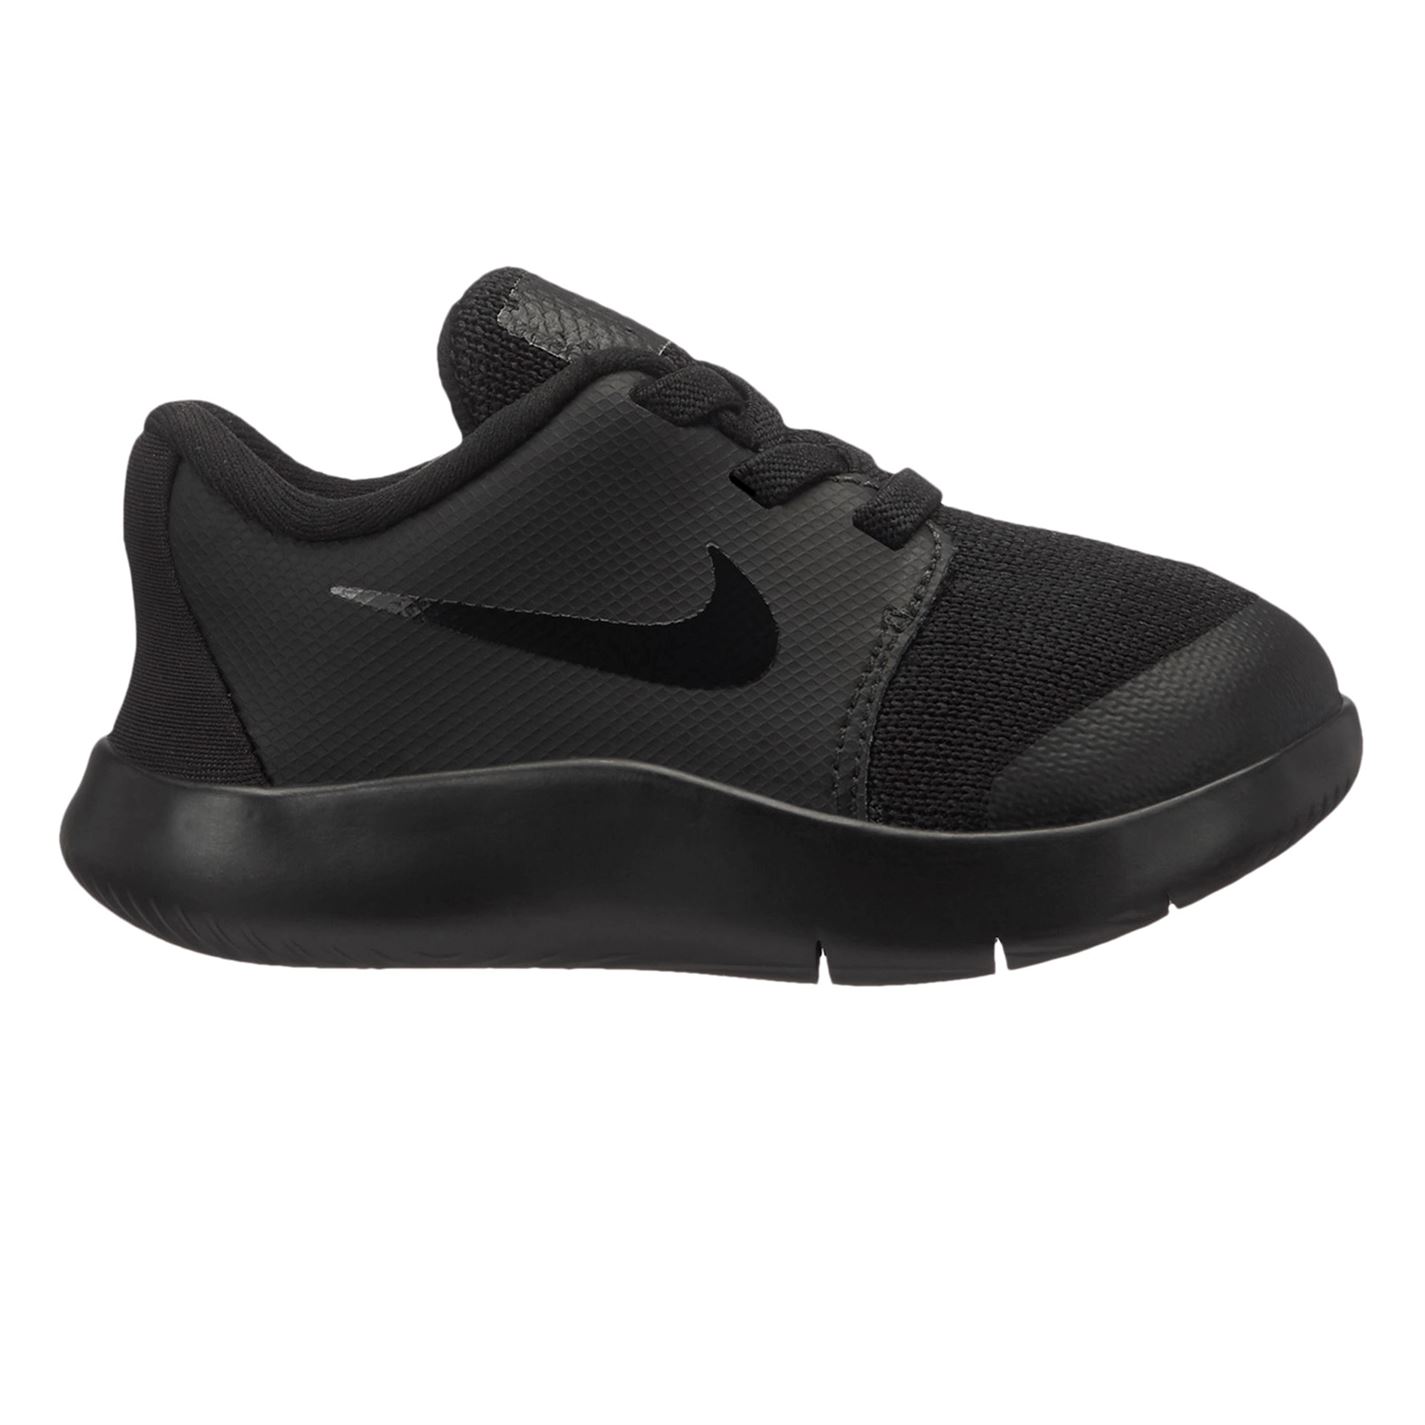 Nike Flex Contact 2 Trainers Infant Boys